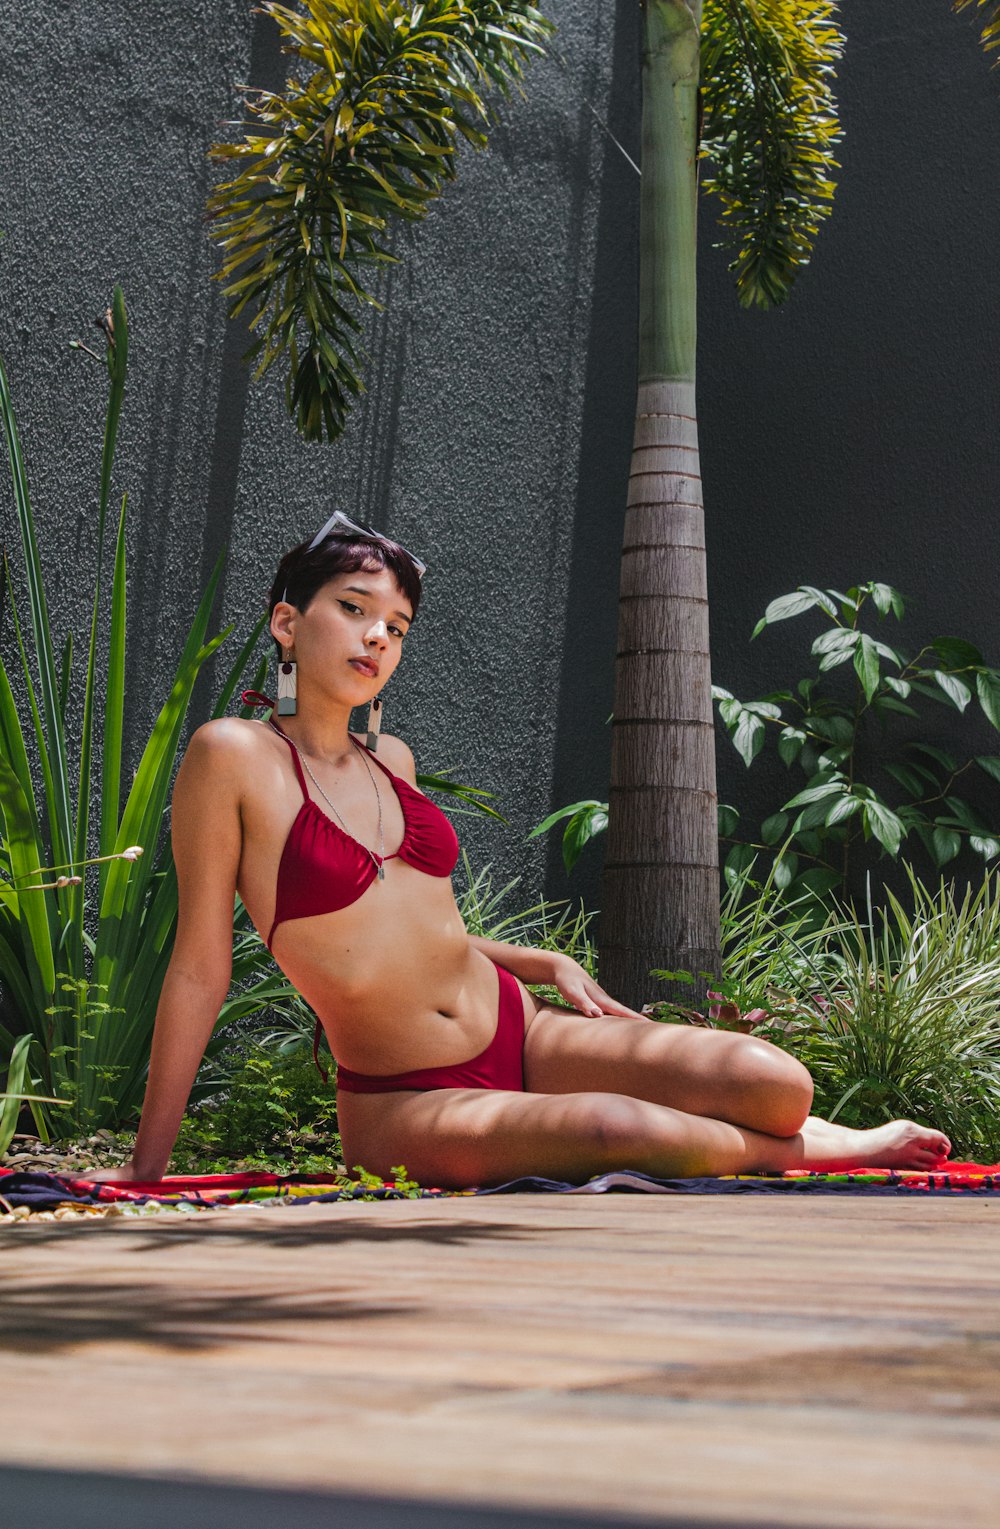 a woman in a red bikini sitting on the ground